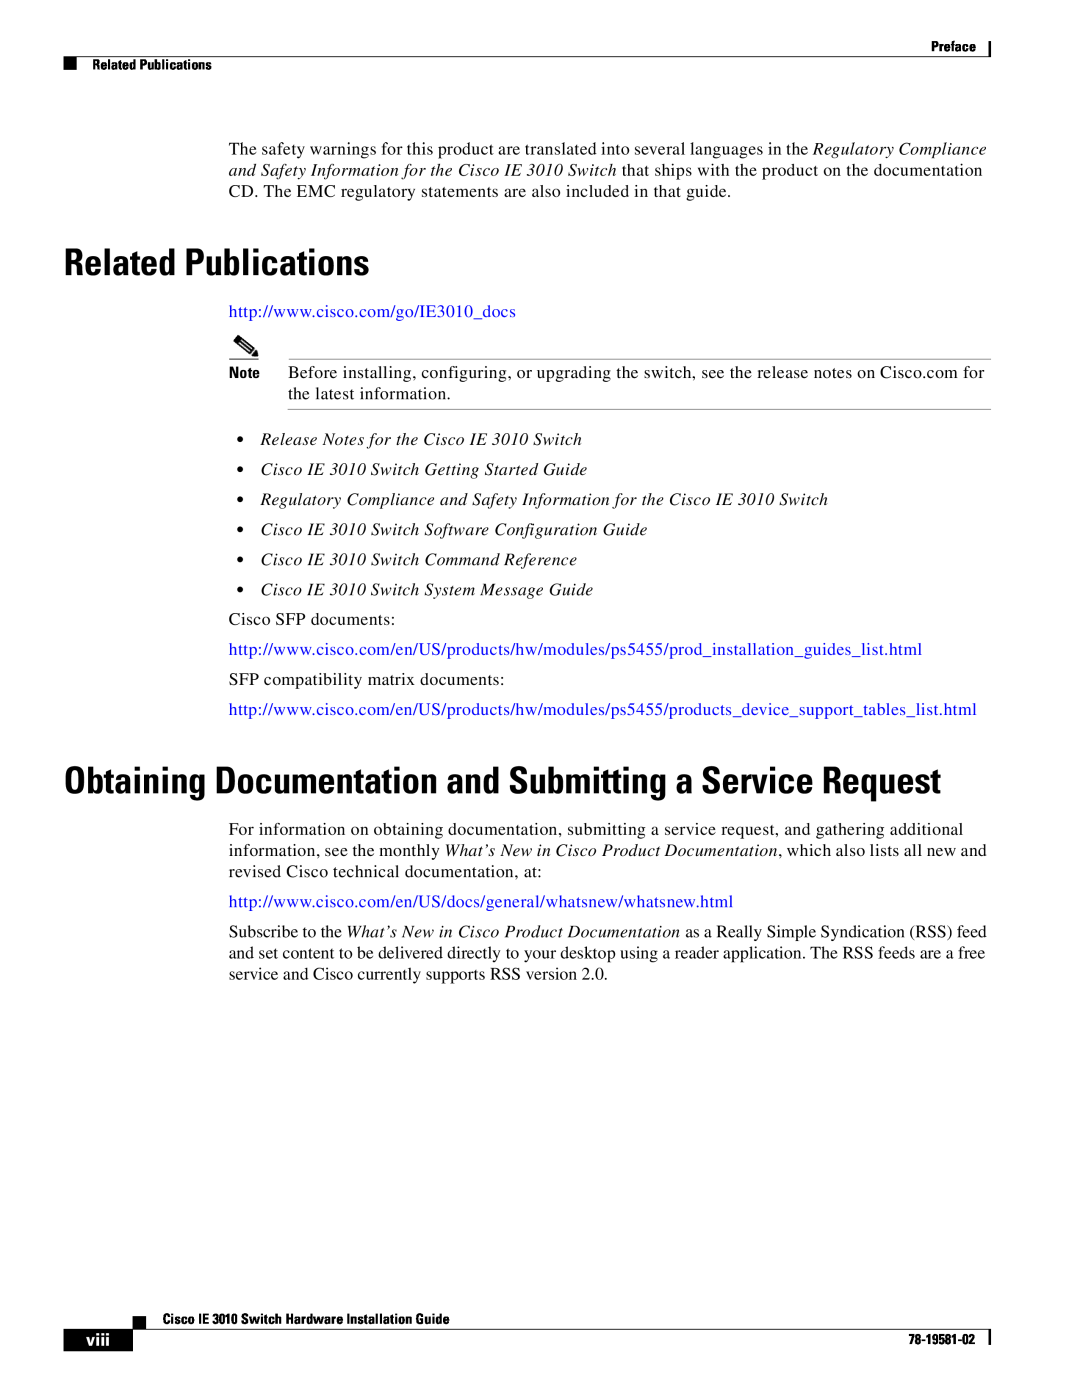 Cisco Systems Related Publications, Release Notes for the Cisco IE 3010 Switch, Cisco IE 3010 Switch Command Reference 